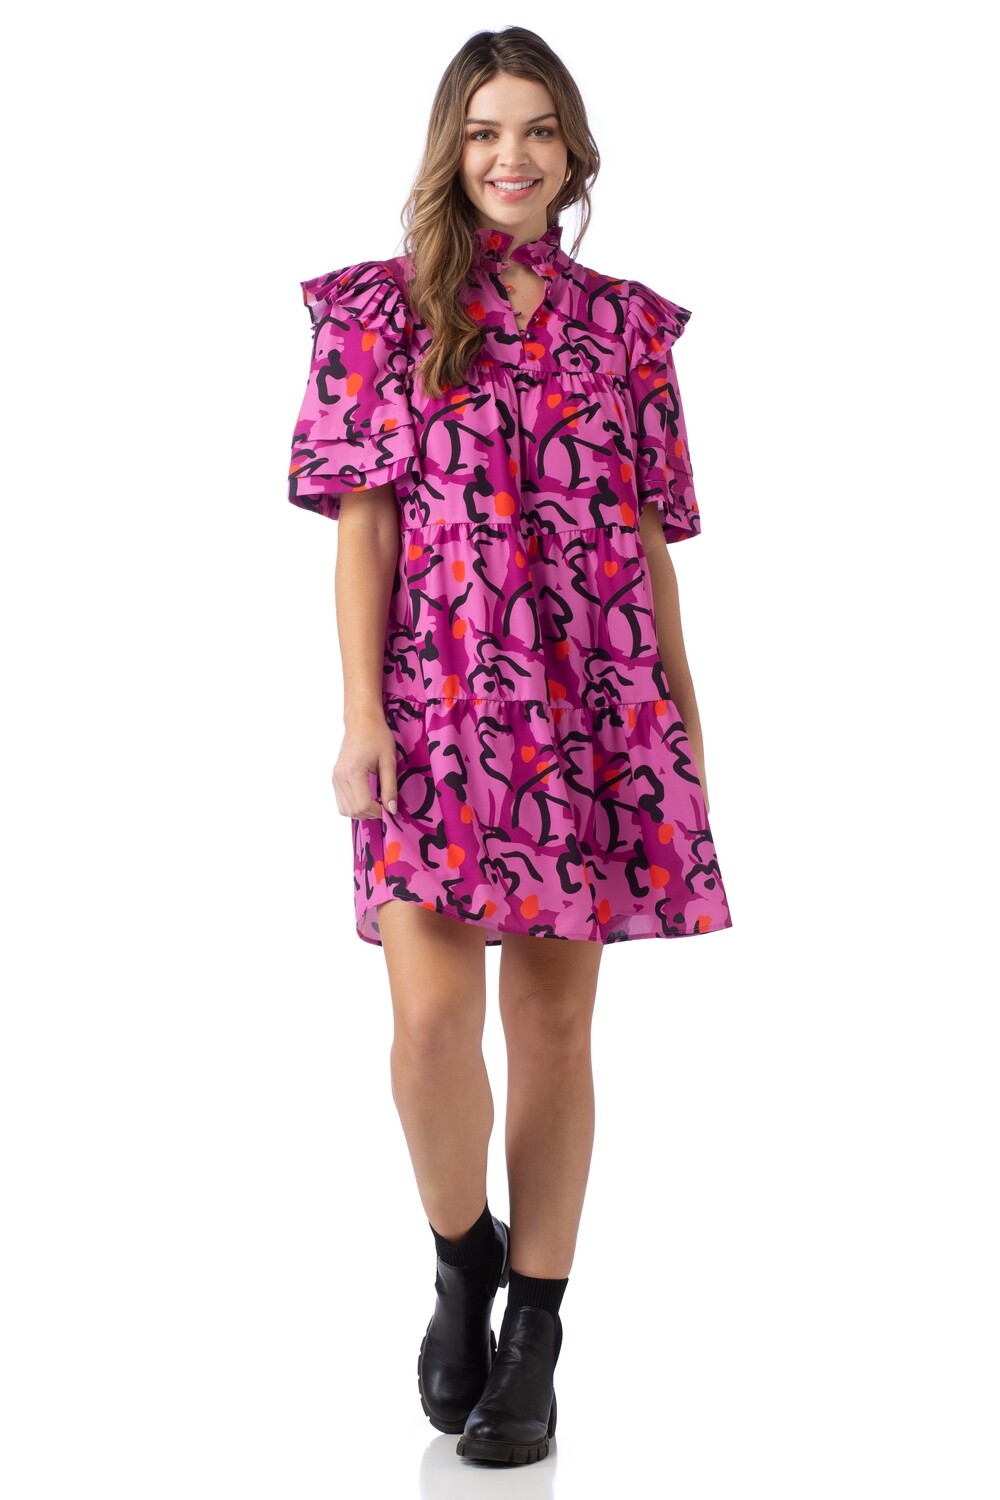 CROSBY Maisie Dress (Expressive Floral)